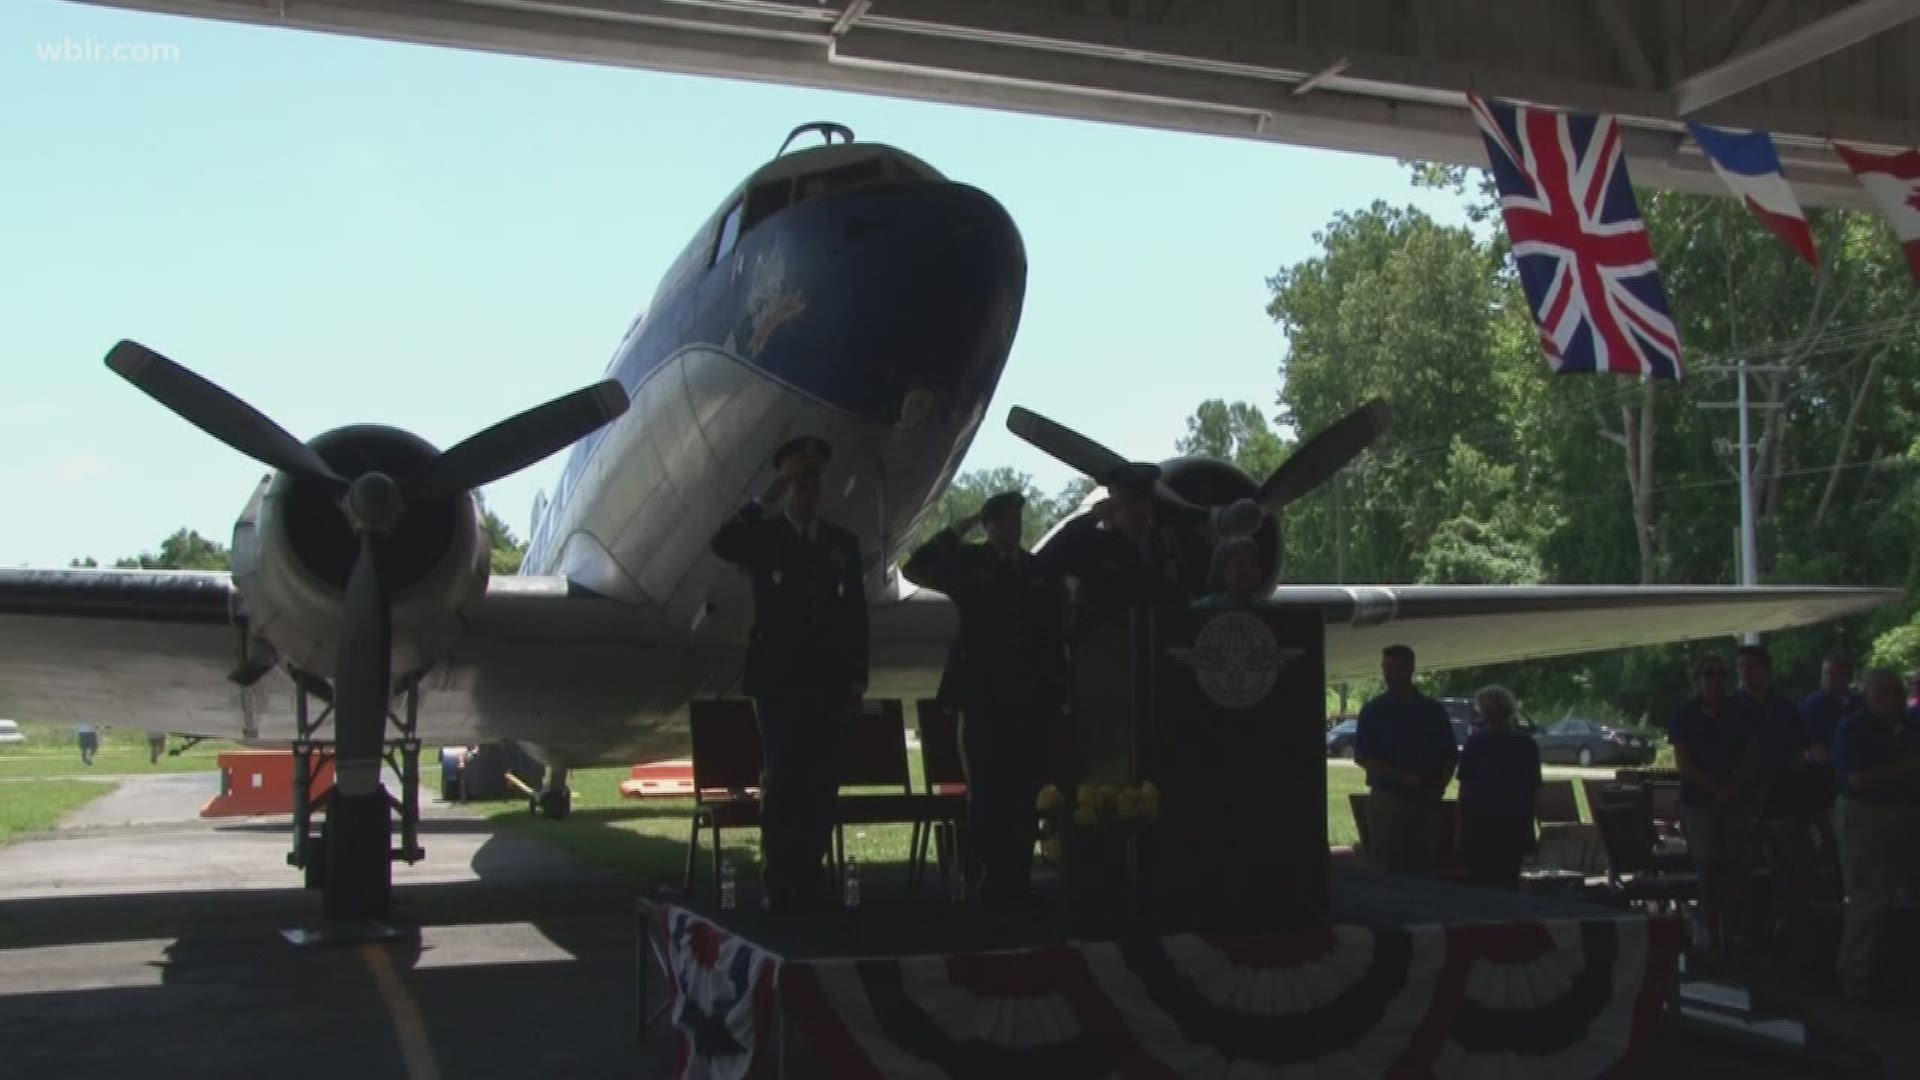 Remote Area Medical- (RAM) will host their annual Salute to Service on Sunday (June 9), at 2pm at RAM's hangar at the Downtown Island Airport (2701 Spence Place) in Knoxville in observance of the 75th anniversary of D-Day. The event is free and open to the public. June 7, 2019-4pm.